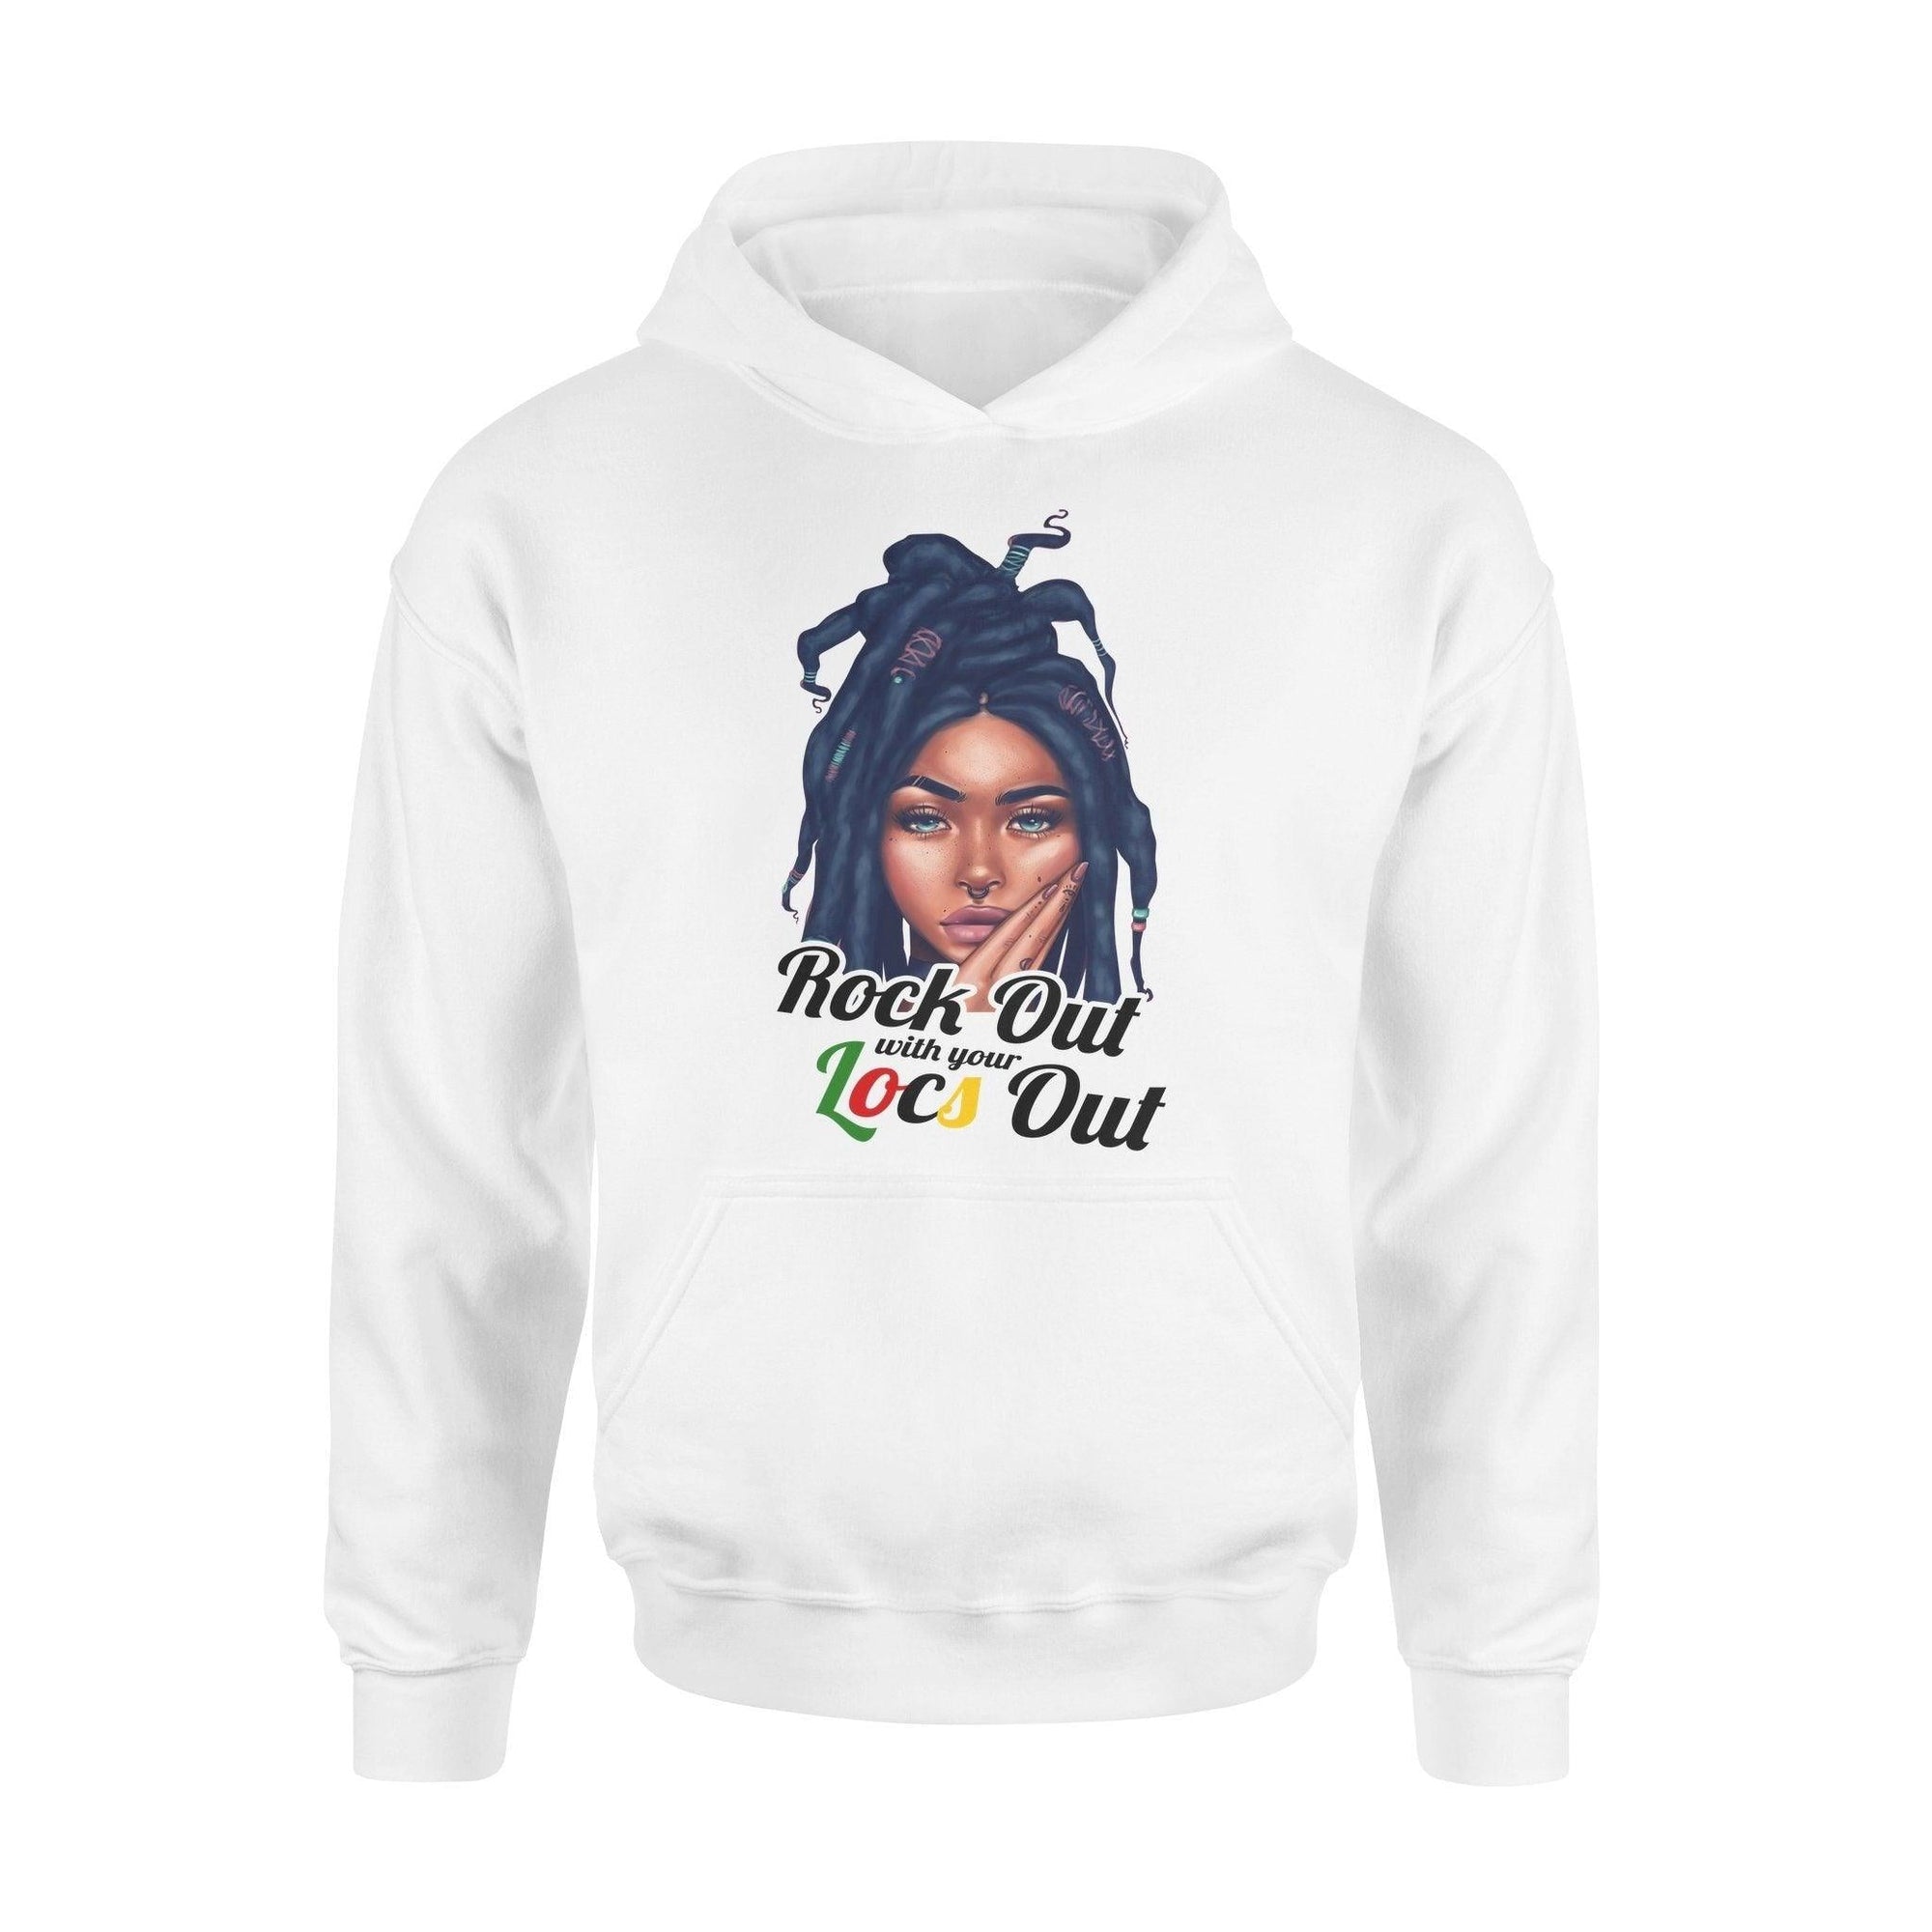 Dreadlock Rock Out With Your Locs Out - Standard Hoodie - PERSONAL84